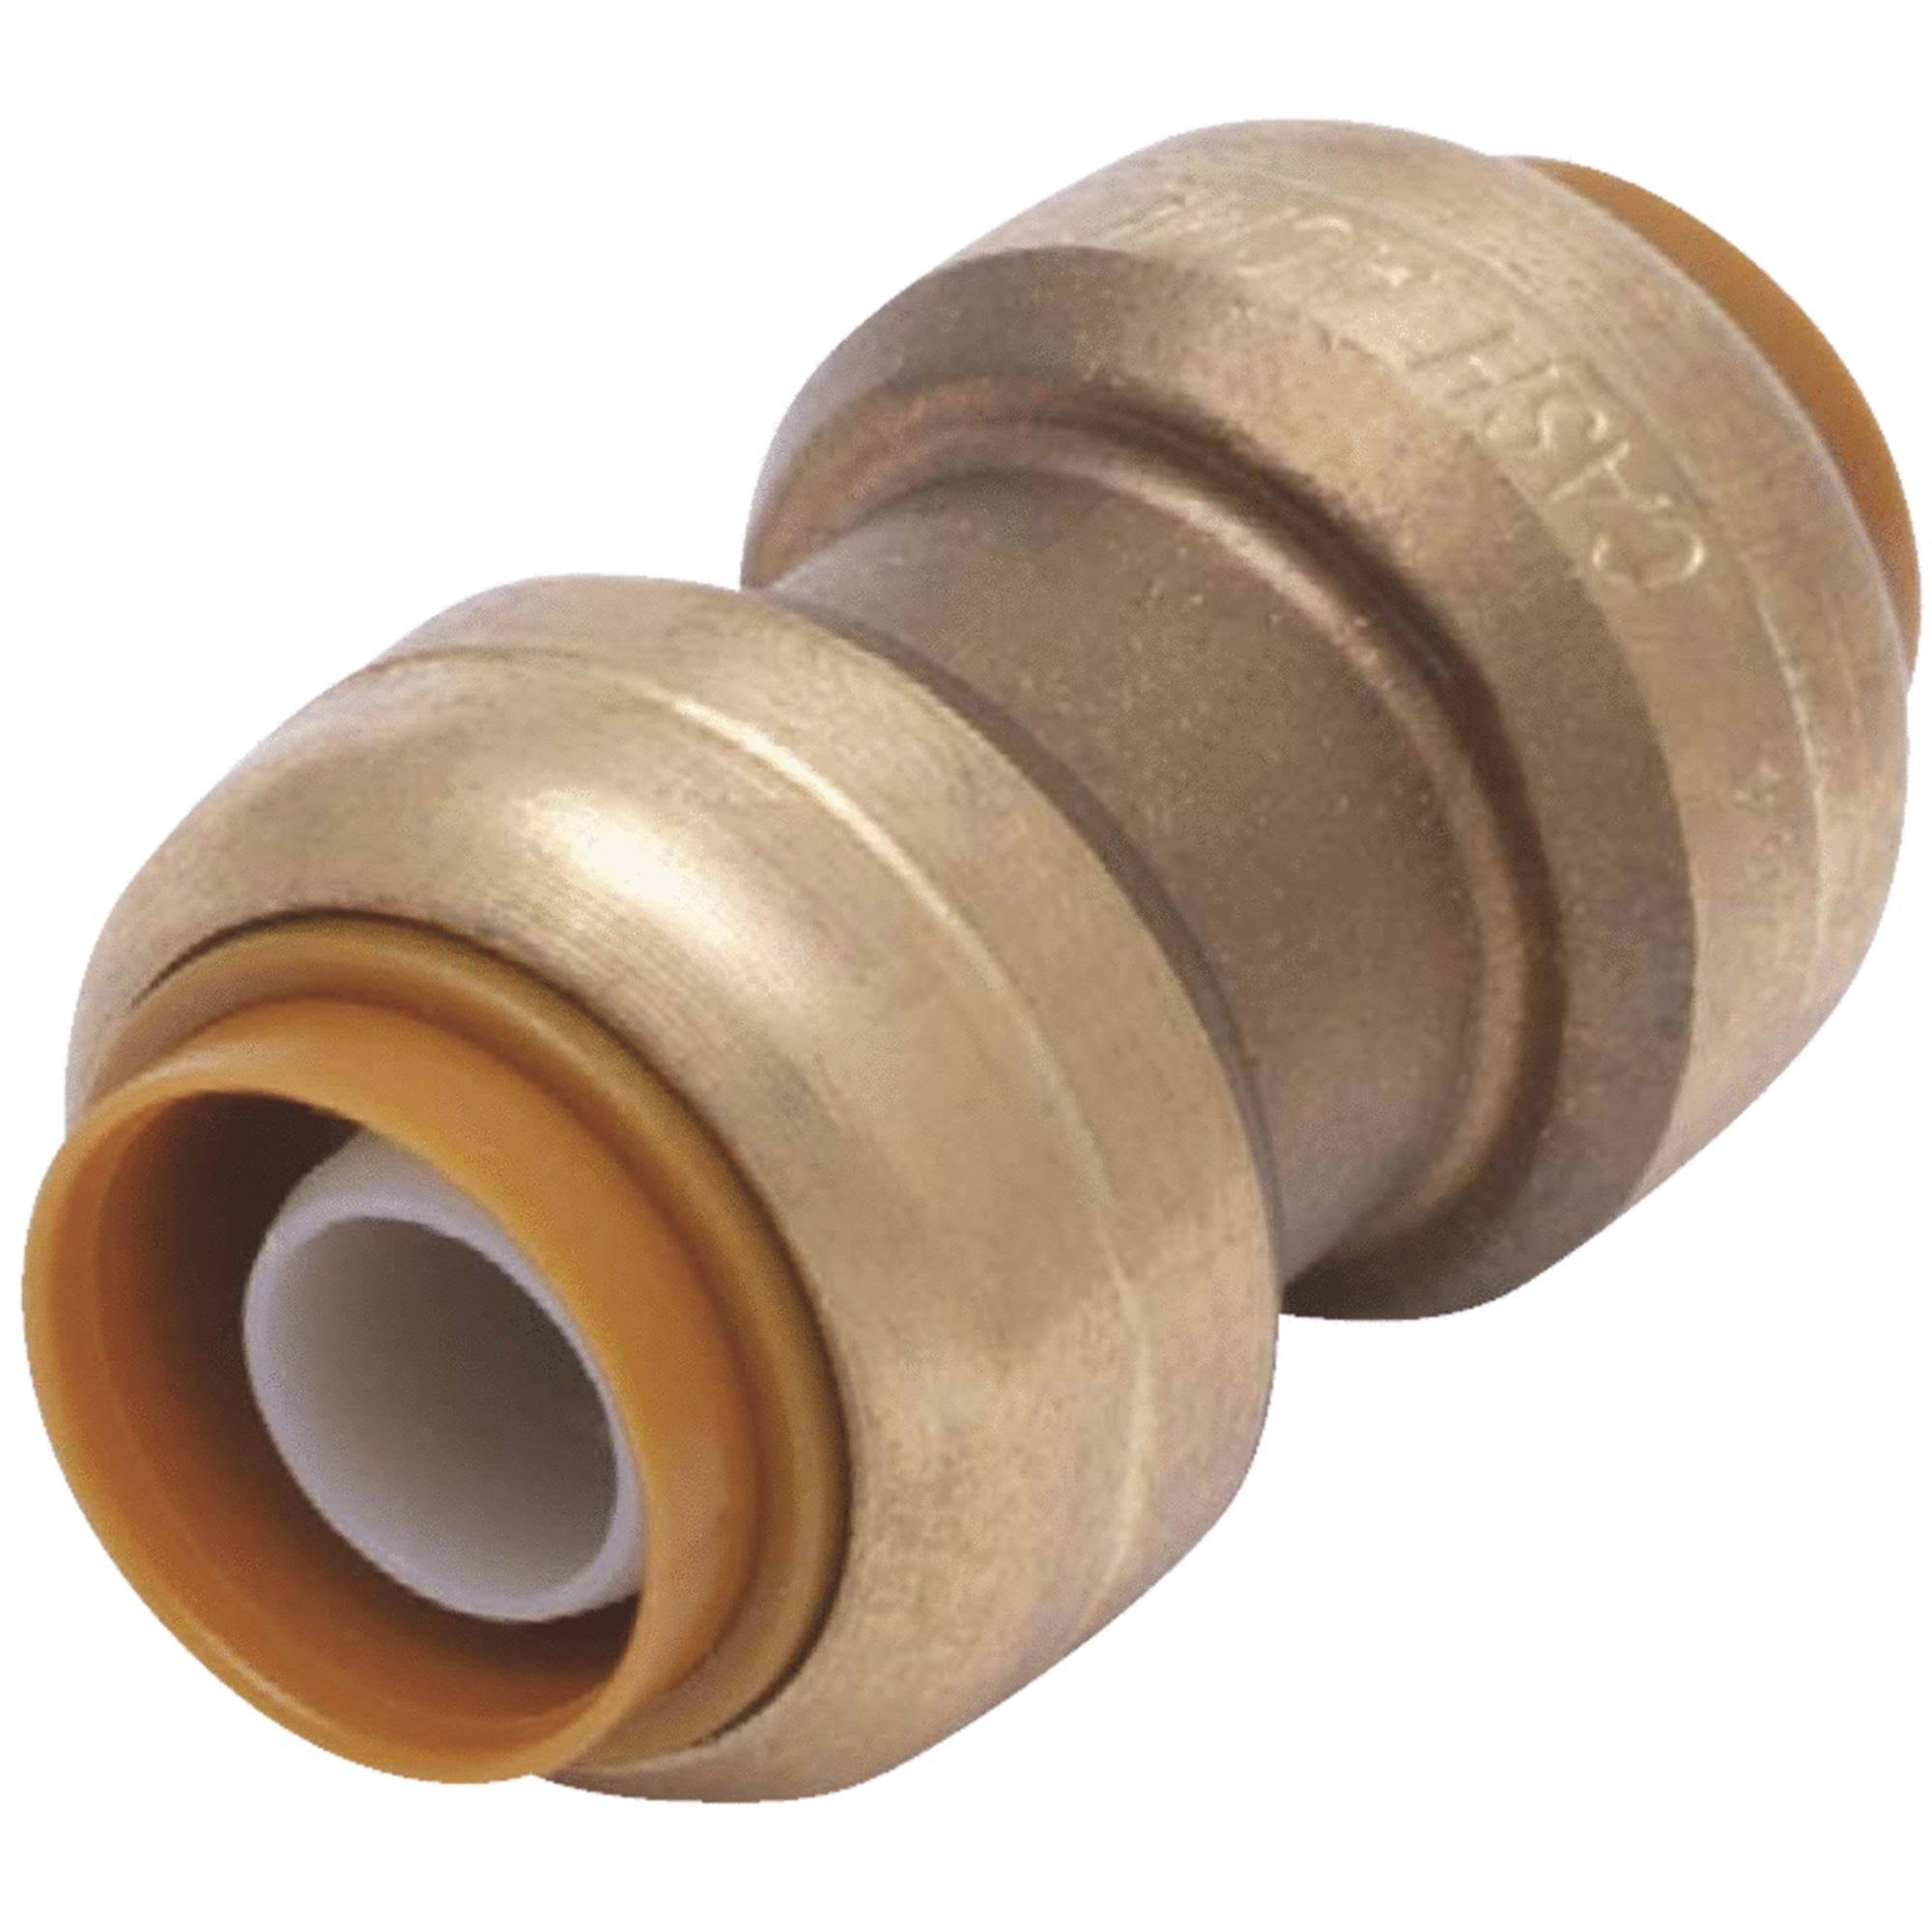 SharkBite Brass Push-to-Connect Coupling - 1/2in